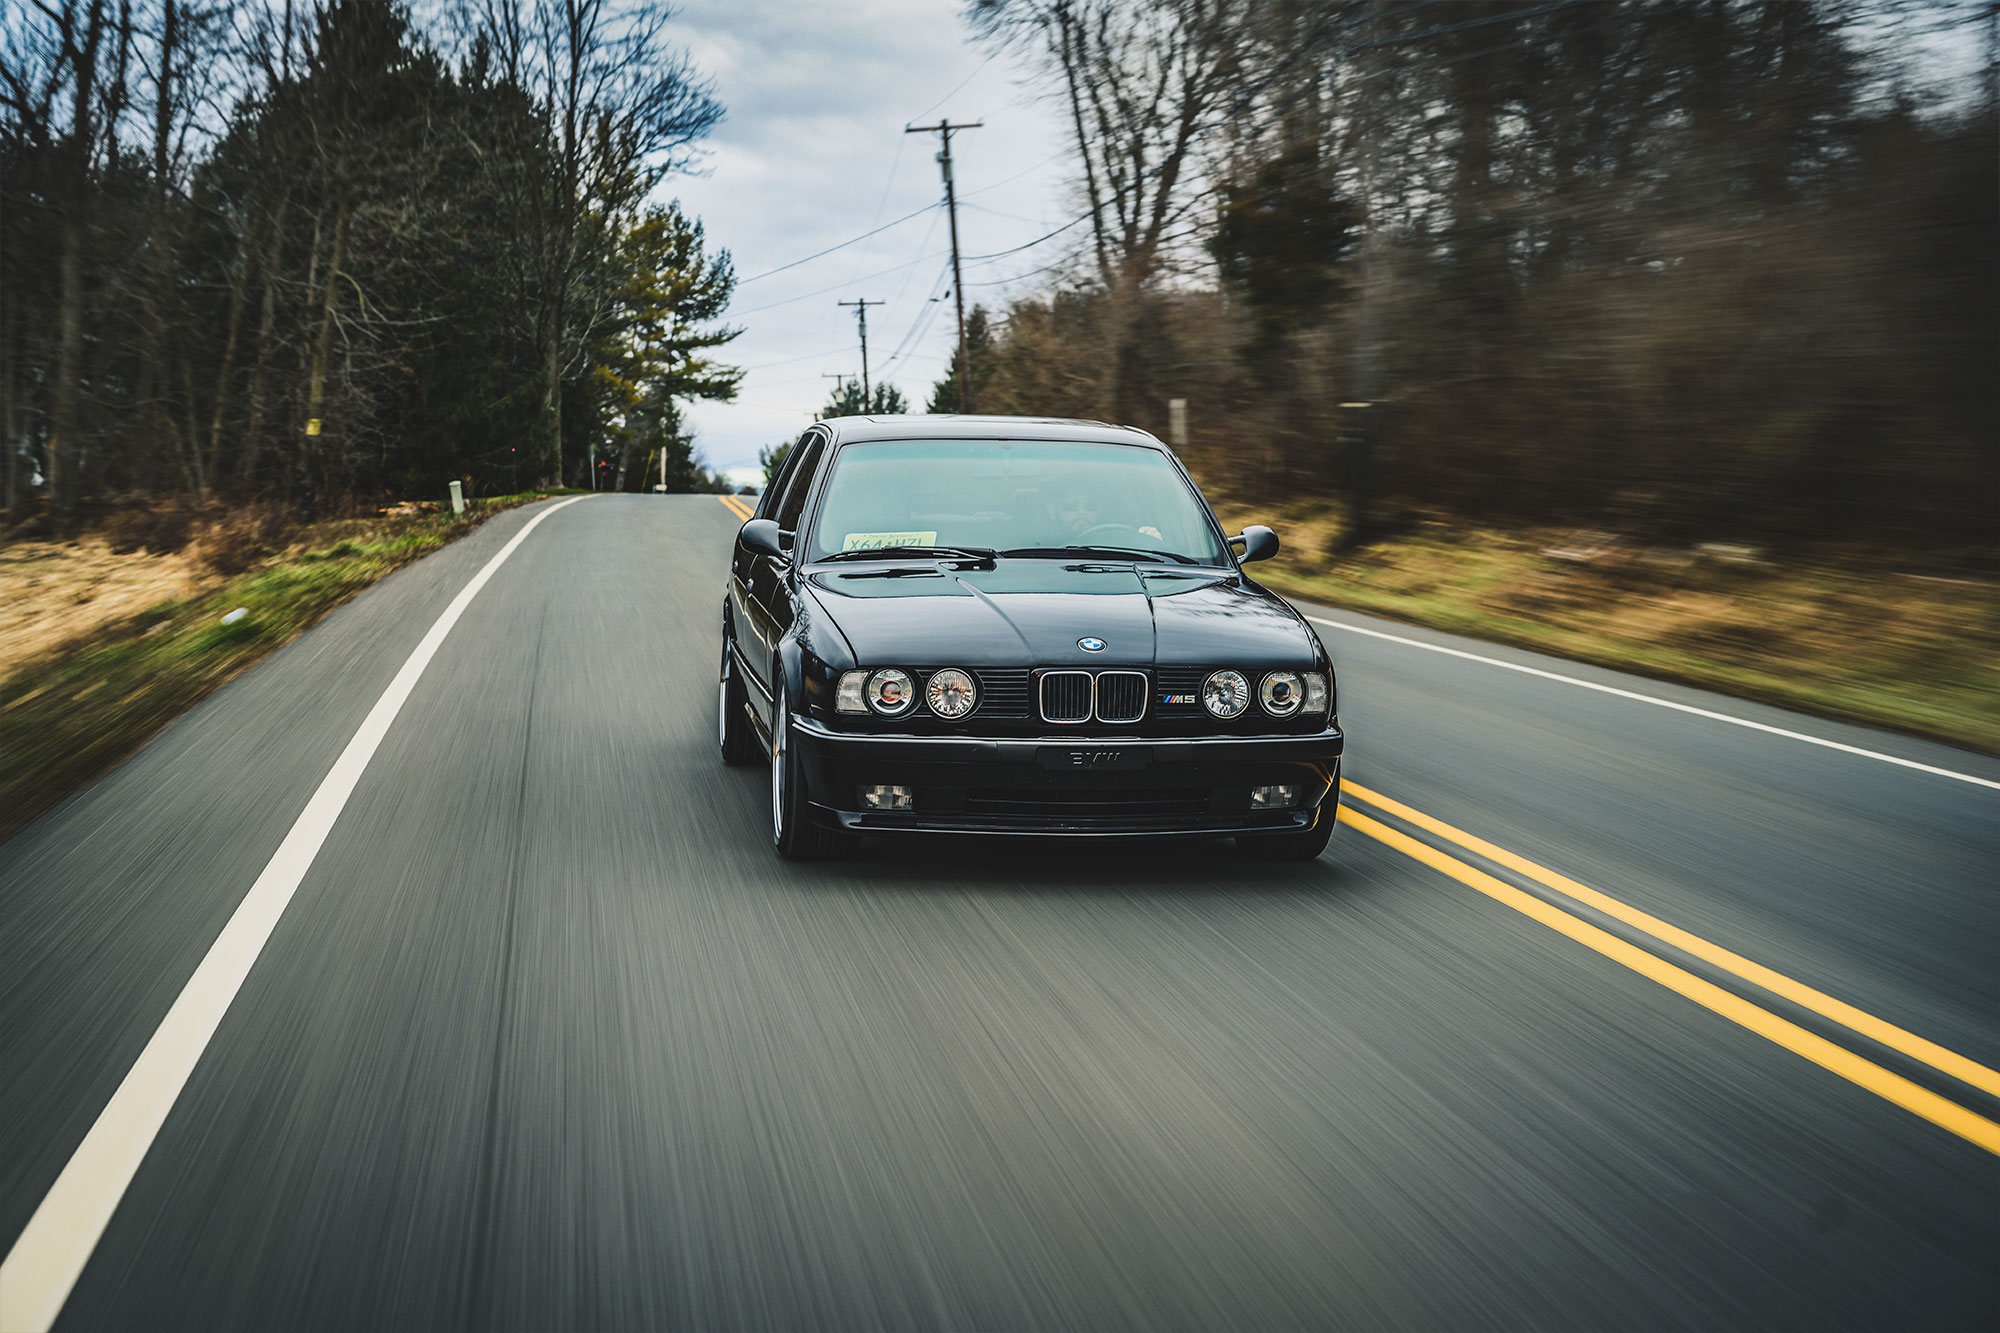 The BMW E34 M5 shoot. Machines With Souls